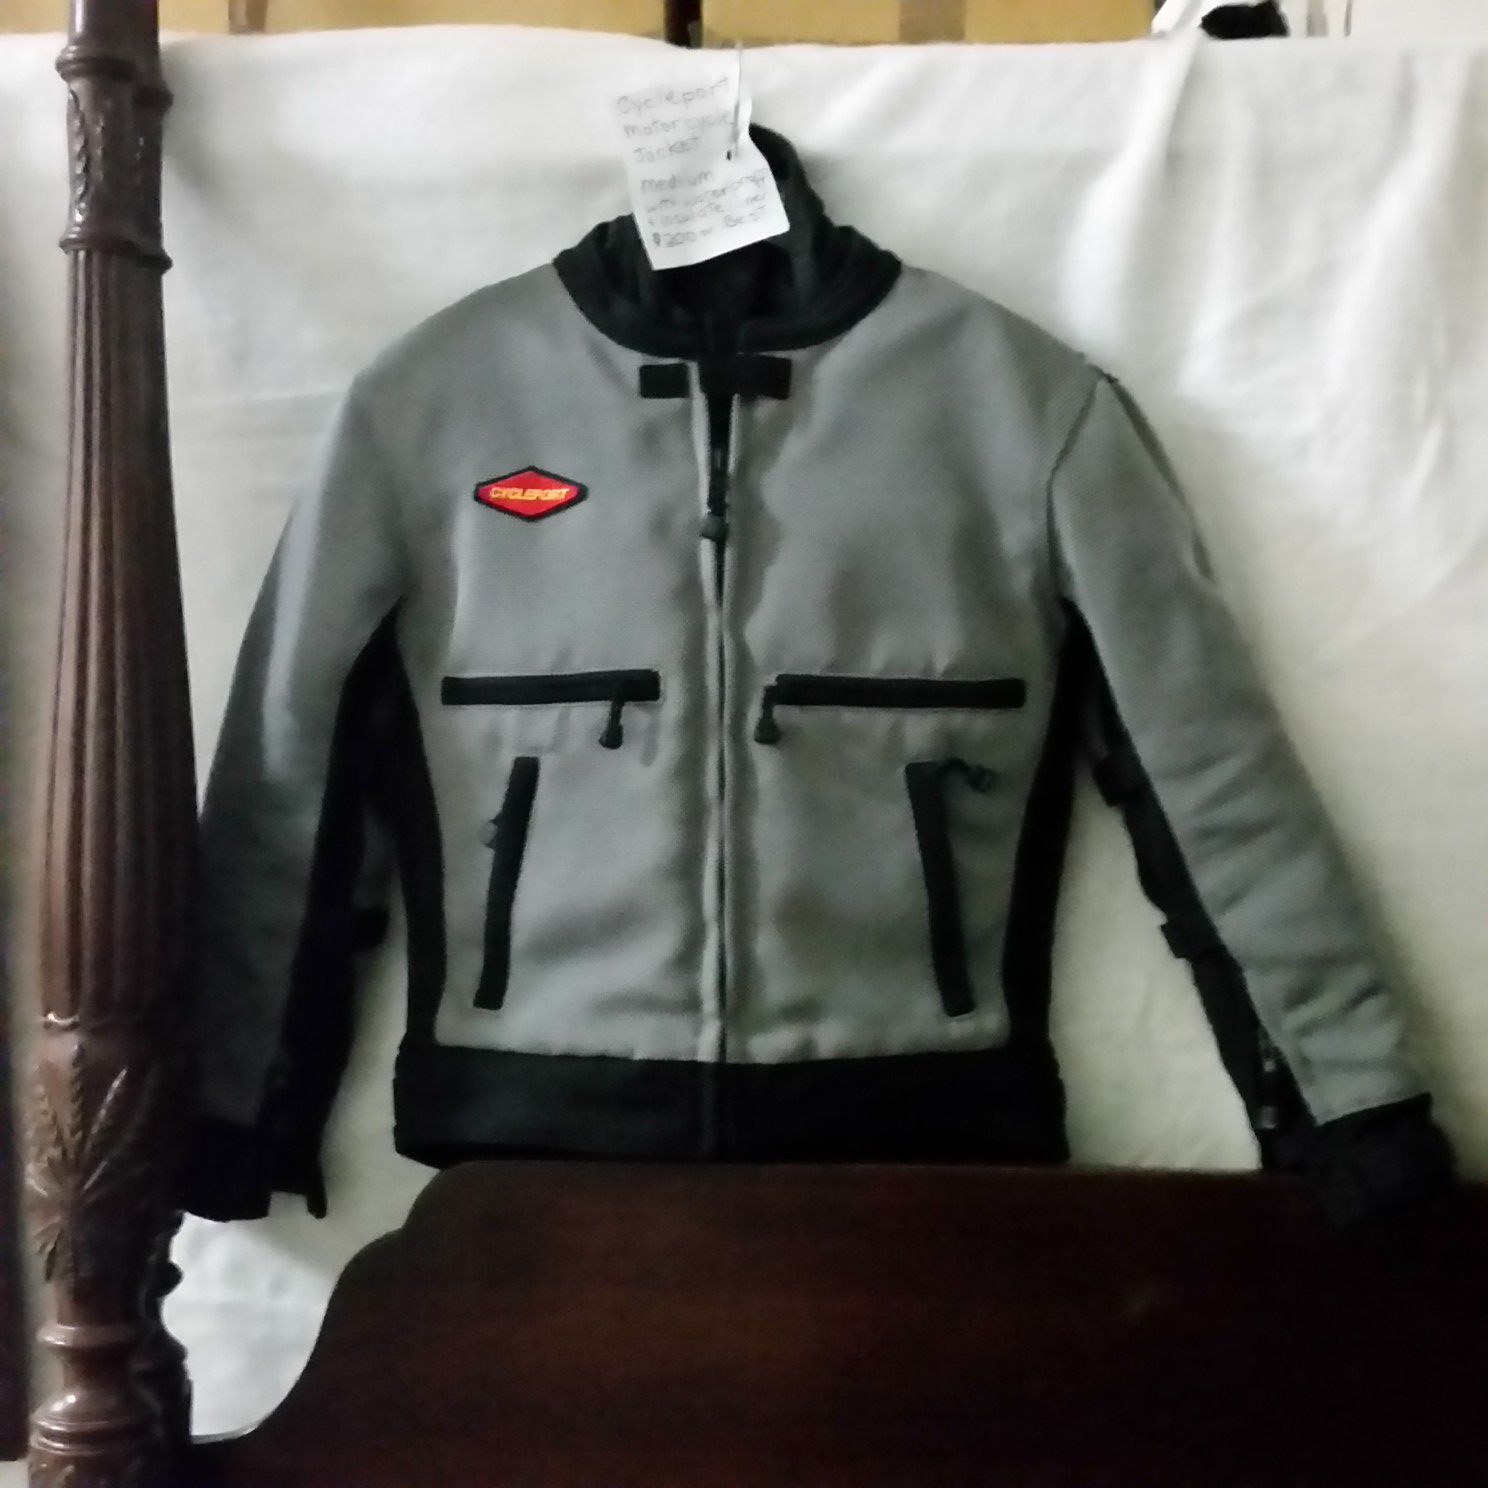 Cycleport Motorcycle Jacket size medium removable Kevlar pads